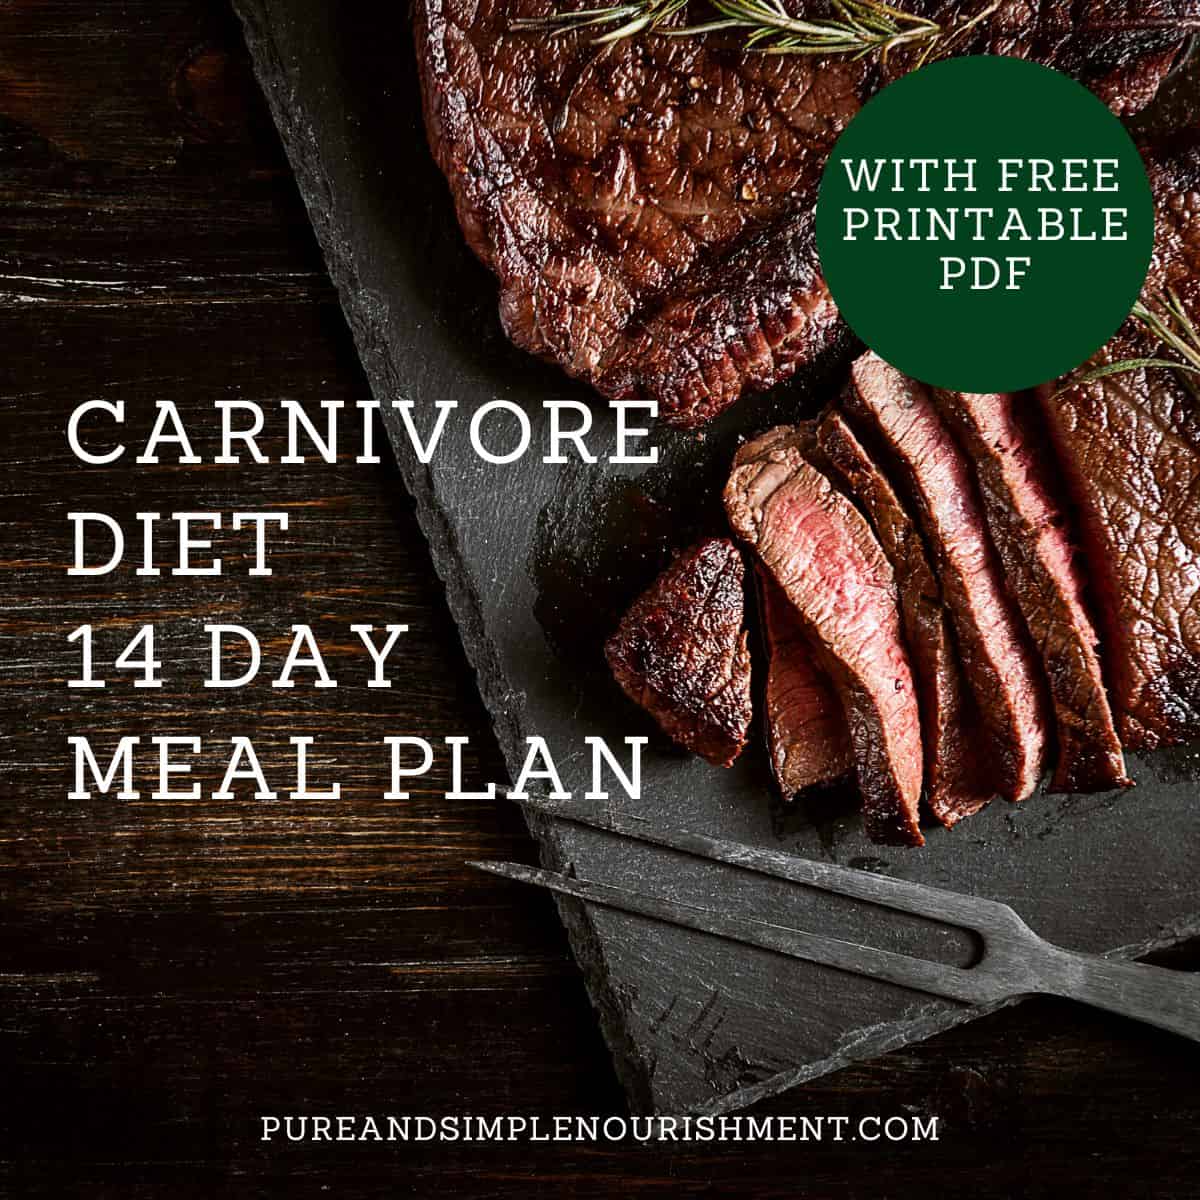 A piece of cut steak on a ceramic slab with the title Carnivore Diet Meal Plan over it.